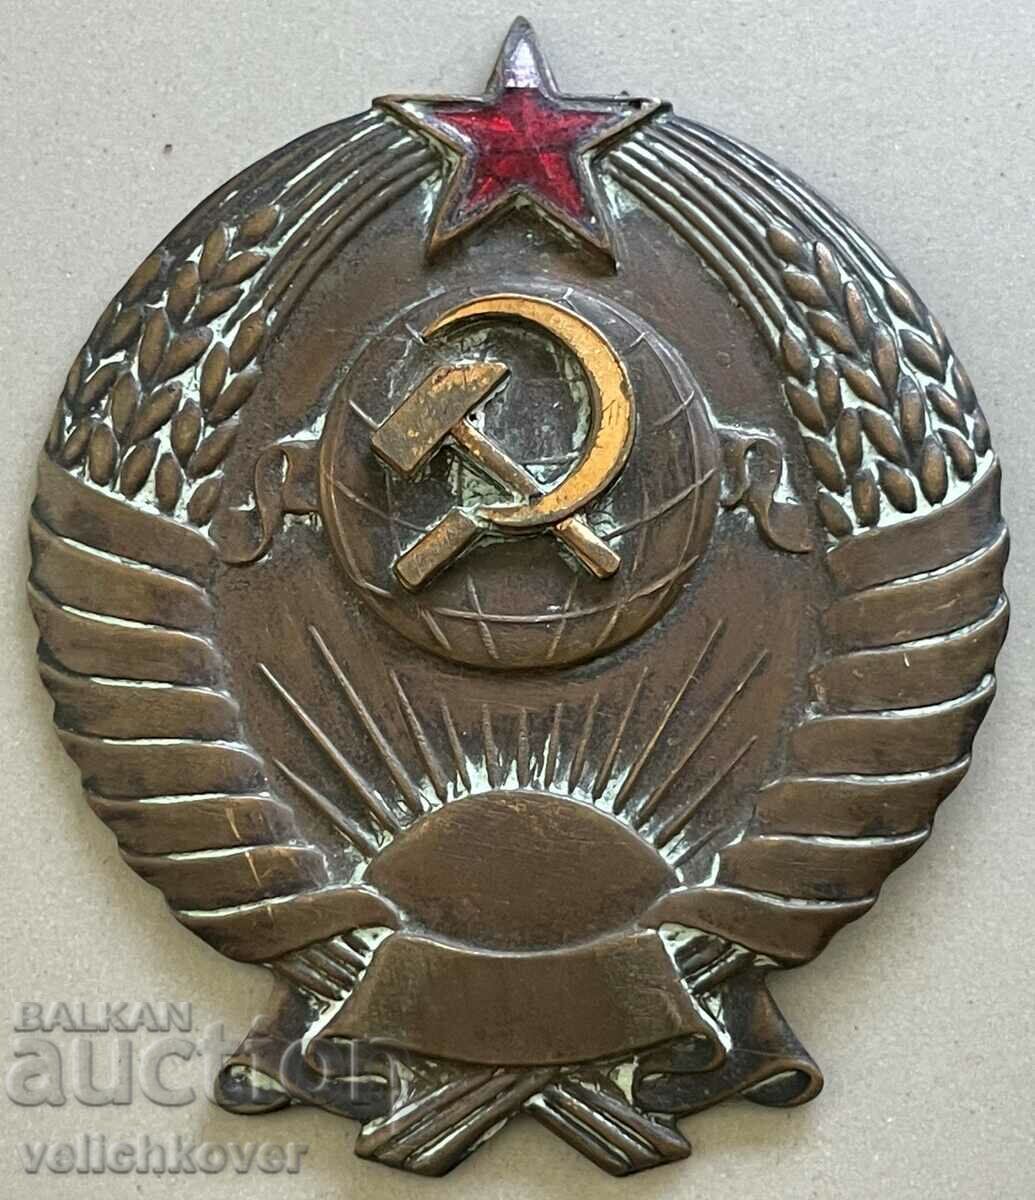 32393 USSR old coat of arms Soviet Union from the 1940s WWII